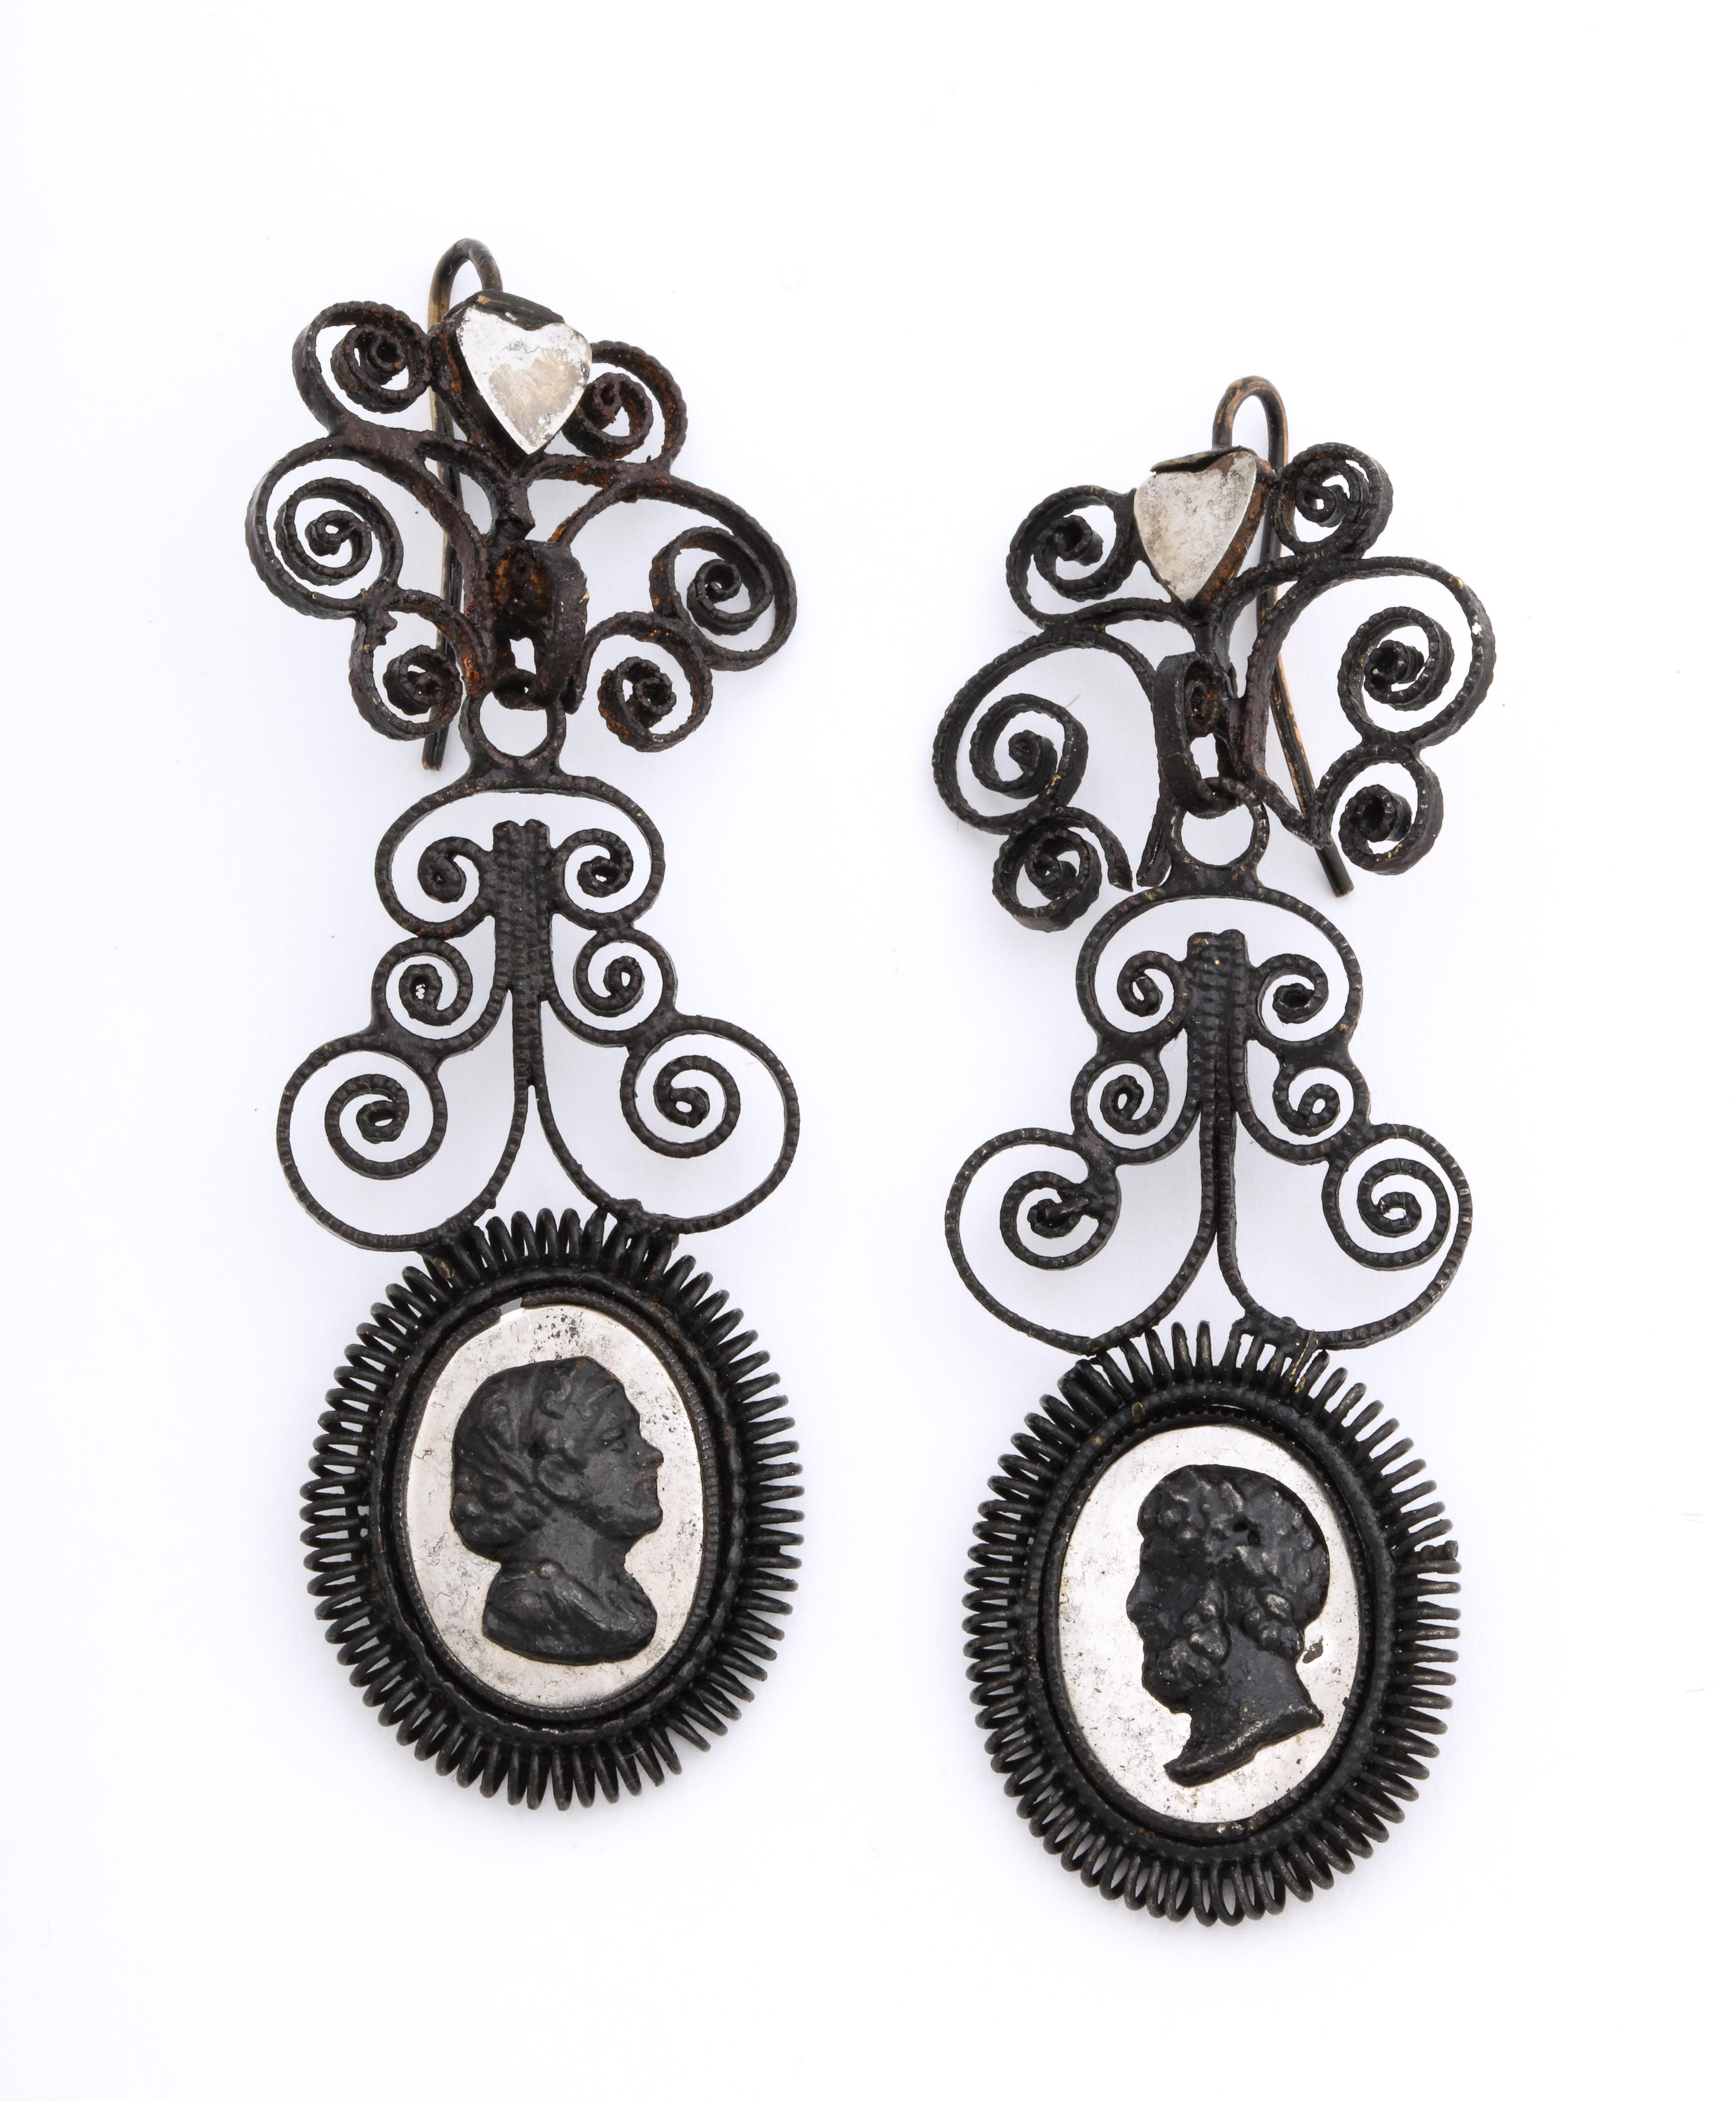 Happy Birthday to these fabulous earrings that are 200 years old this year. Berlin Iron jewelry in excellent condition is rare, even in the museums of the world. The earrings are in three sections, the top two being frilly fine spirals of iron with